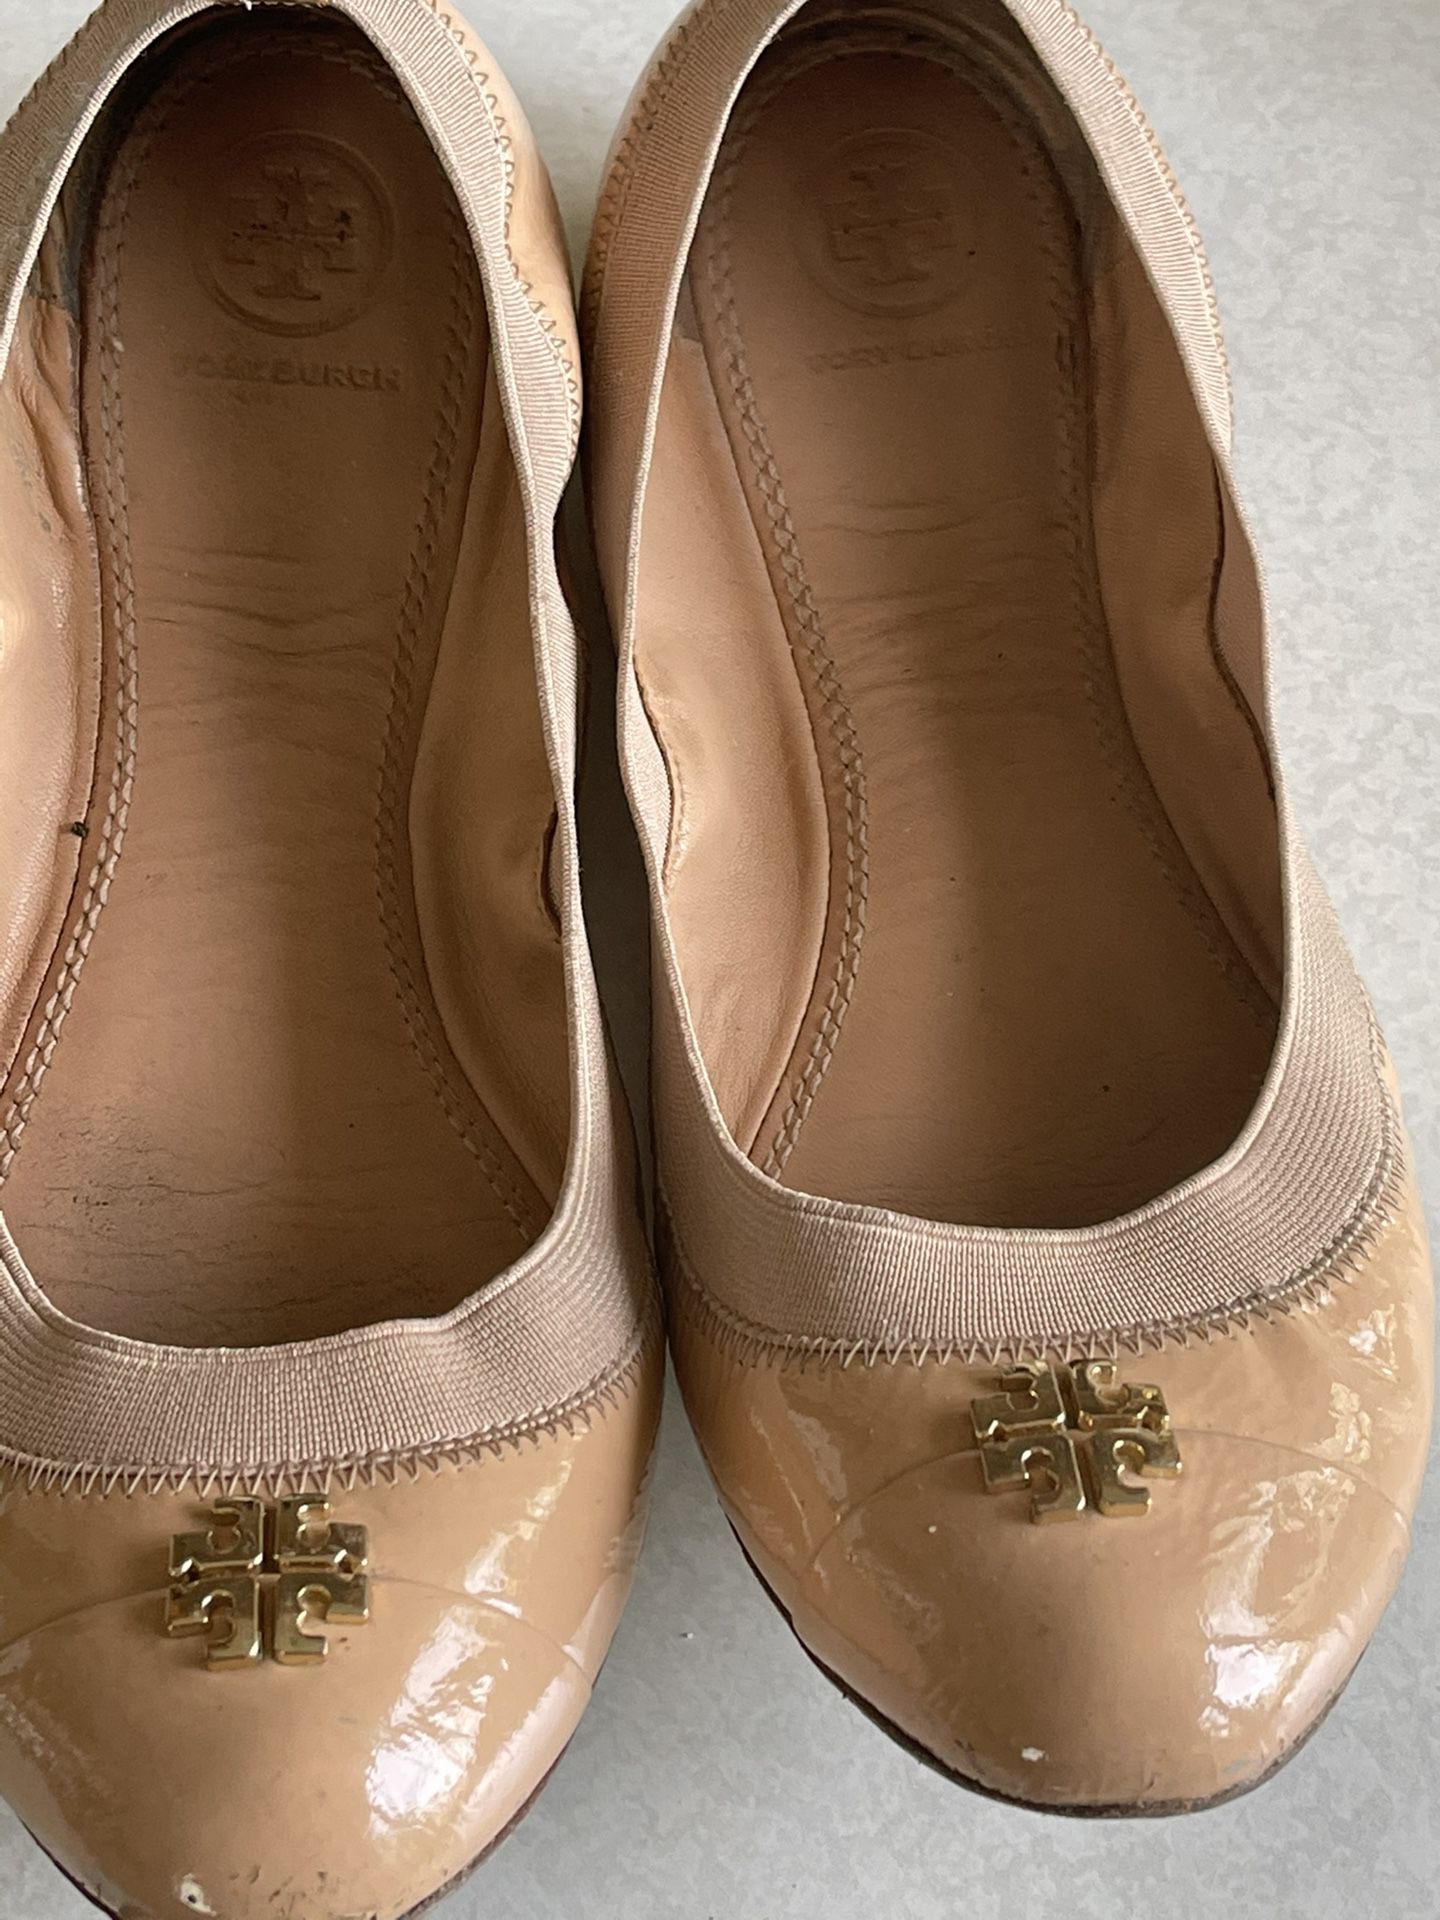 Tory Burch Flats for Sale in Brooklyn, NY - OfferUp